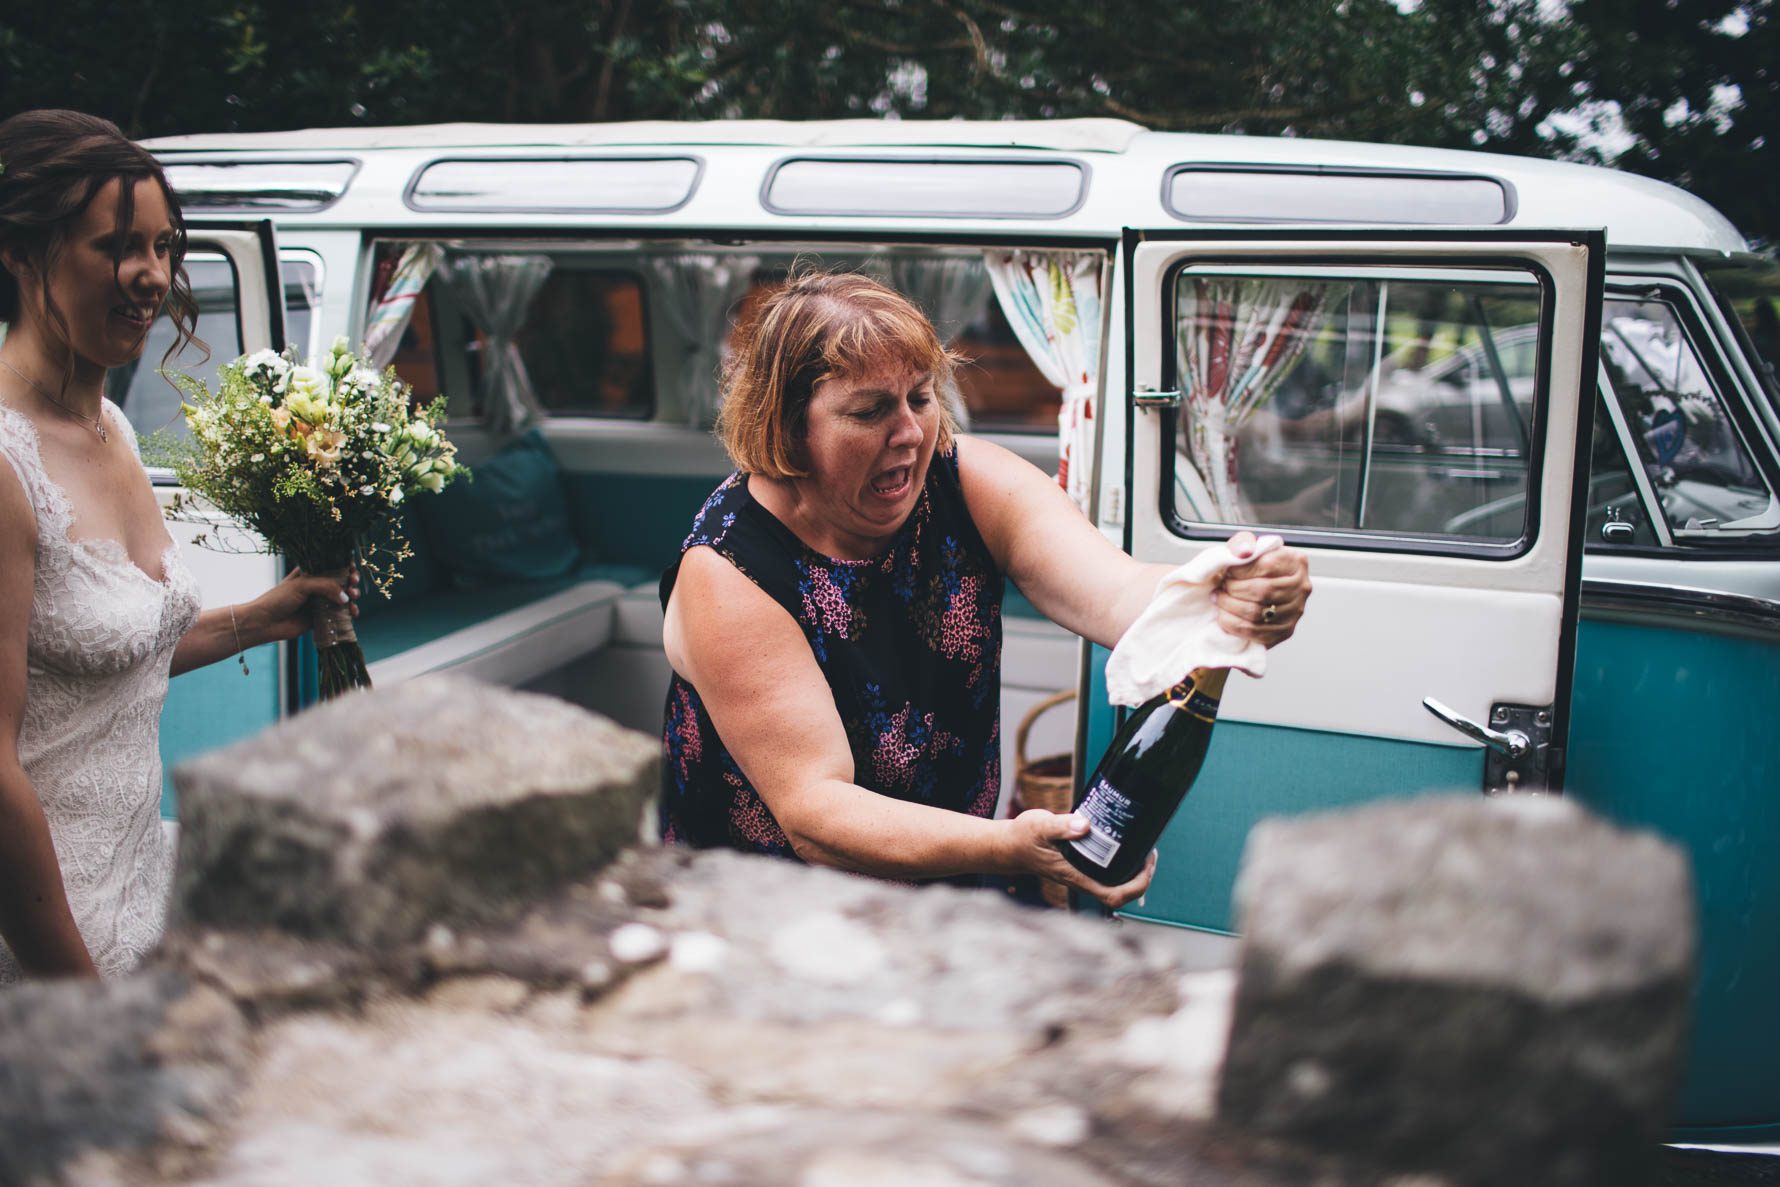 Female wedding guest opening a bottle of champagne half covered with a napkin in front of a turquoise blue vintage VW campervan as the bride looks on holding a bouquet of flowers